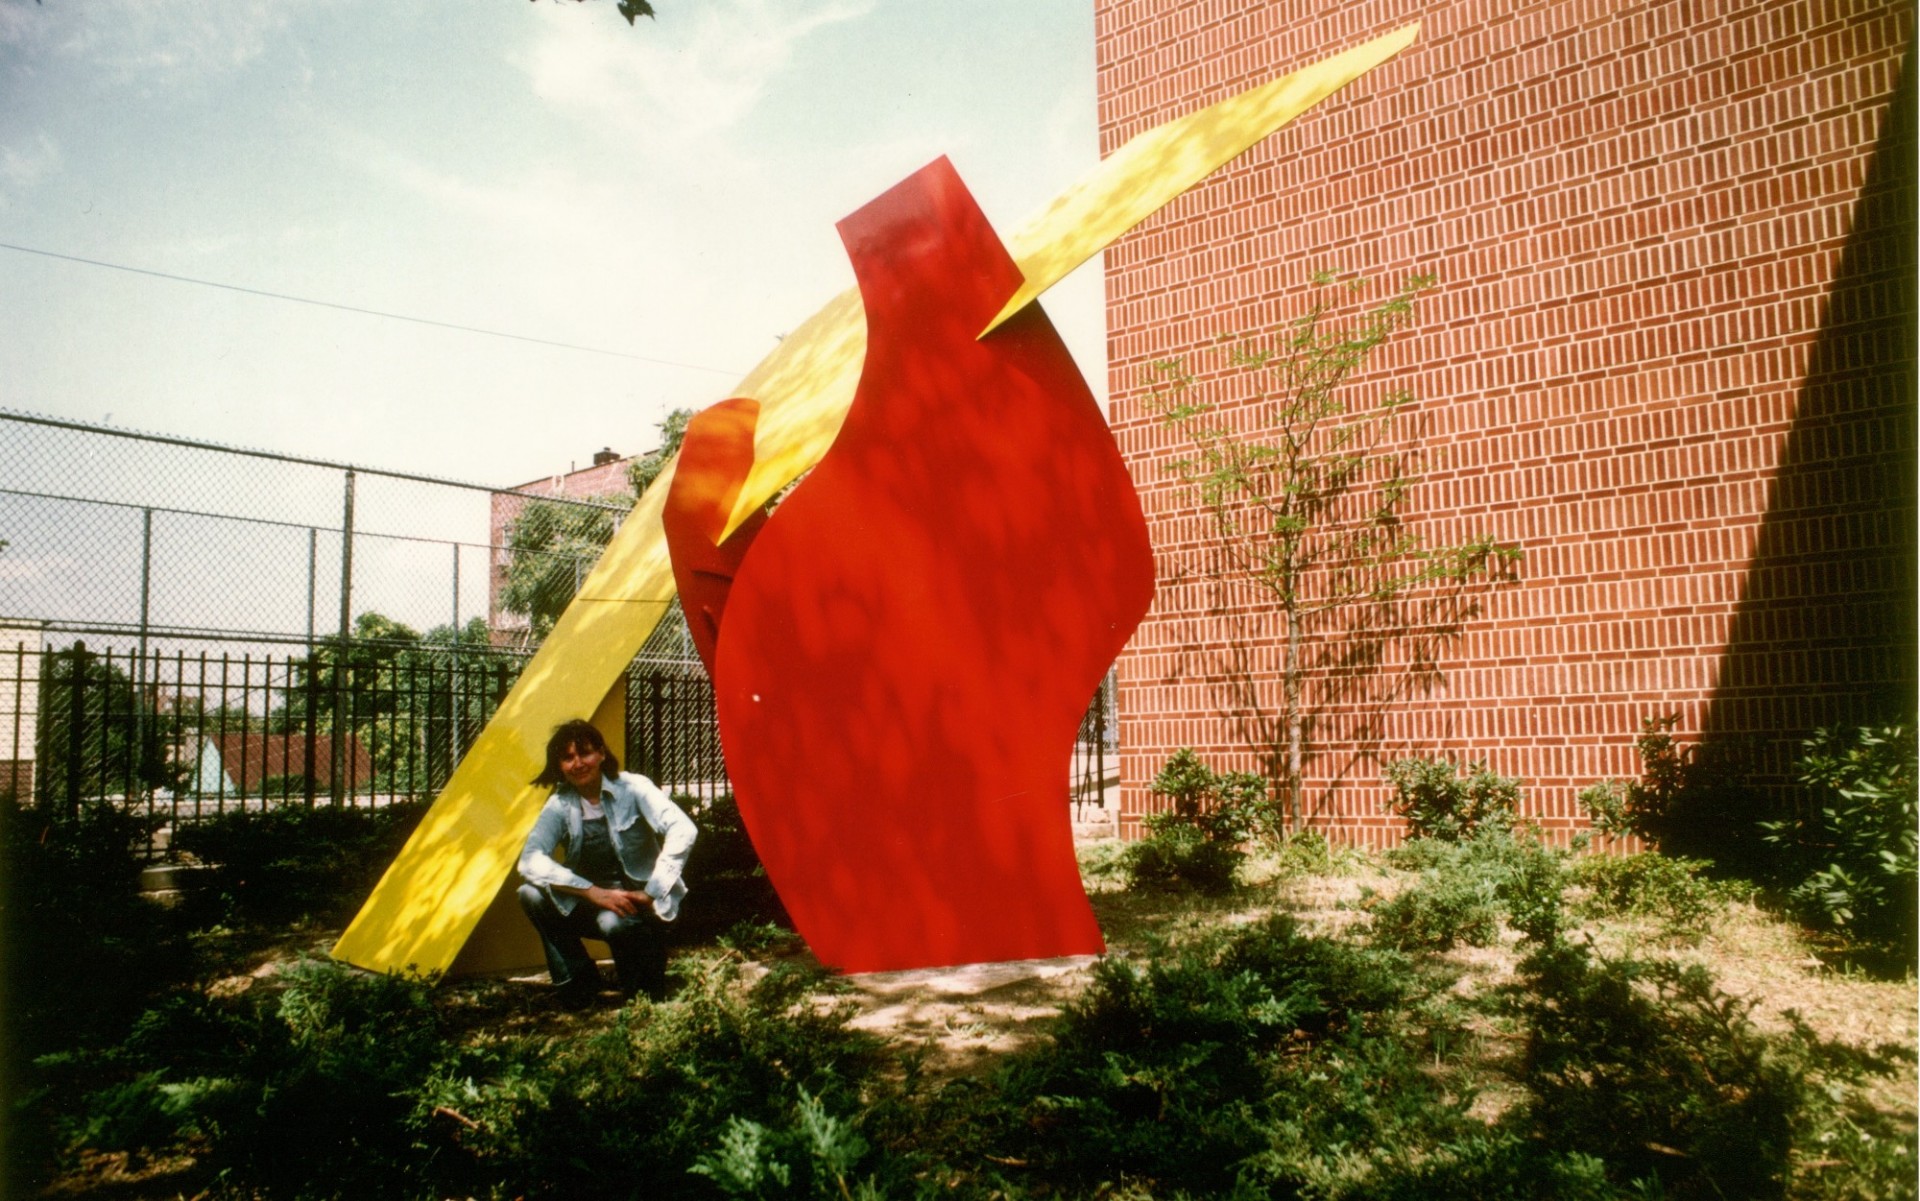 A woman sits next to a large red and yellow abstract sculpture